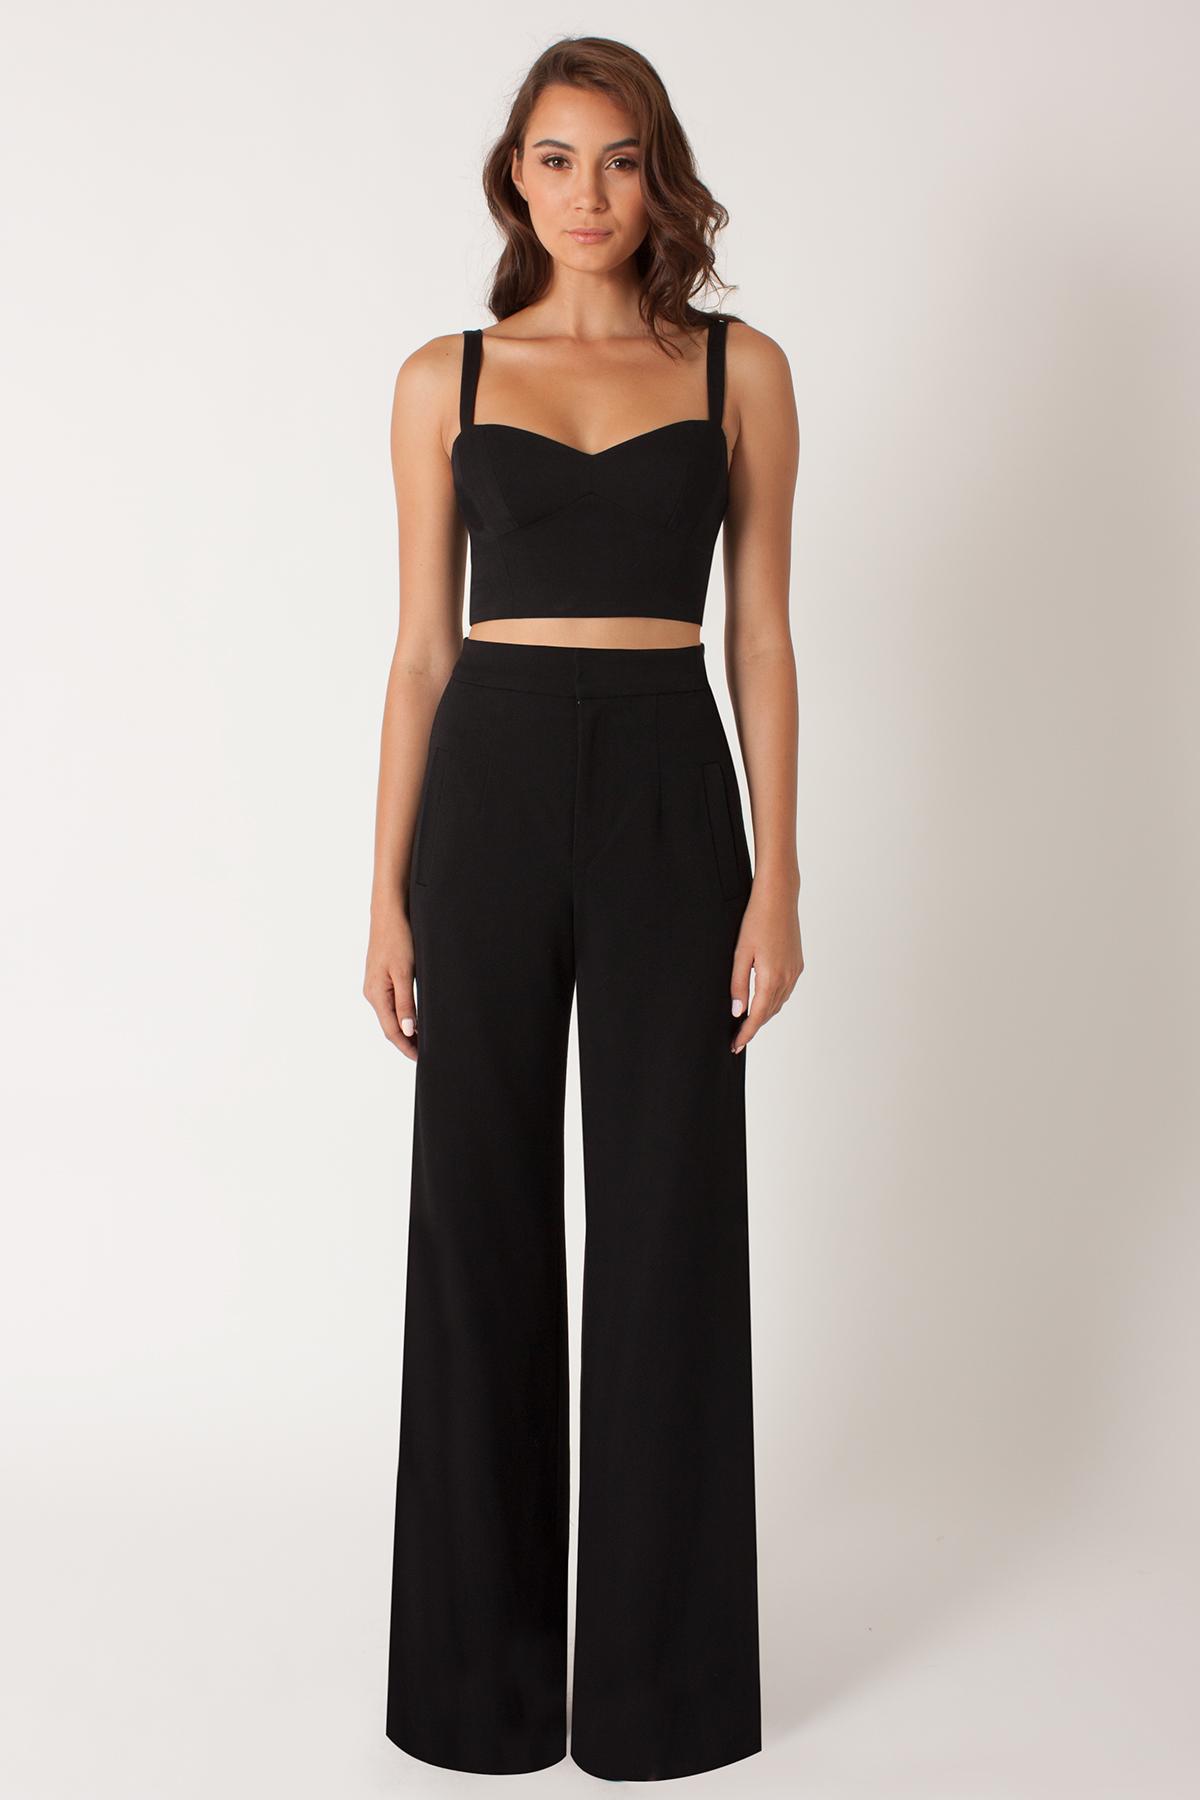 TWO PIECE FLARED JUMPSUIT - Black